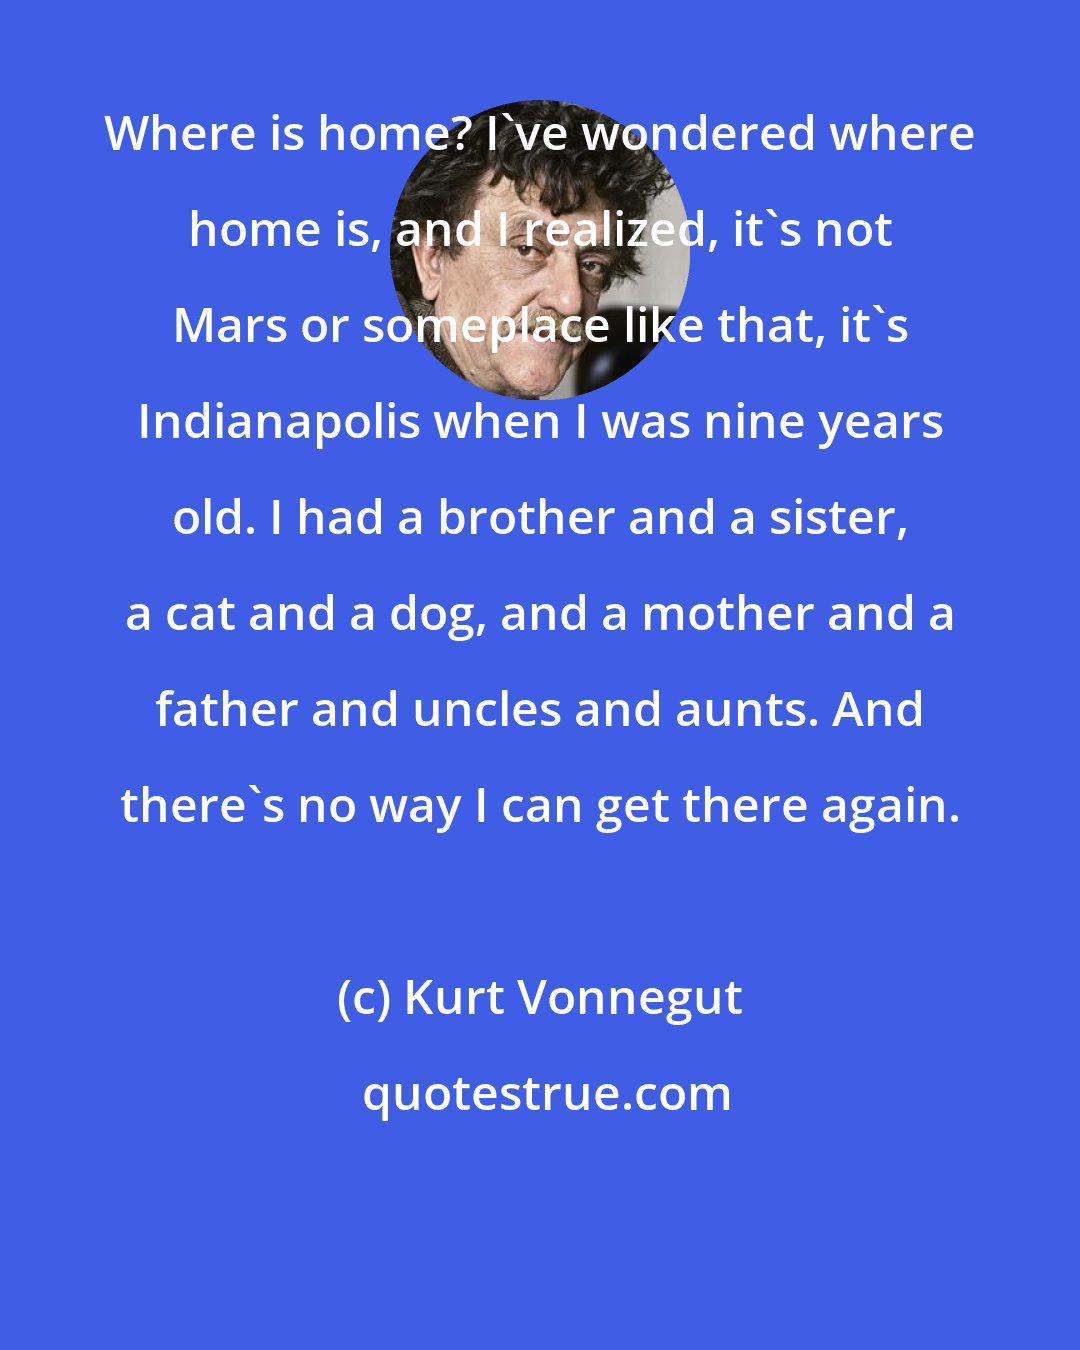 Kurt Vonnegut: Where is home? I've wondered where home is, and I realized, it's not Mars or someplace like that, it's Indianapolis when I was nine years old. I had a brother and a sister, a cat and a dog, and a mother and a father and uncles and aunts. And there's no way I can get there again.